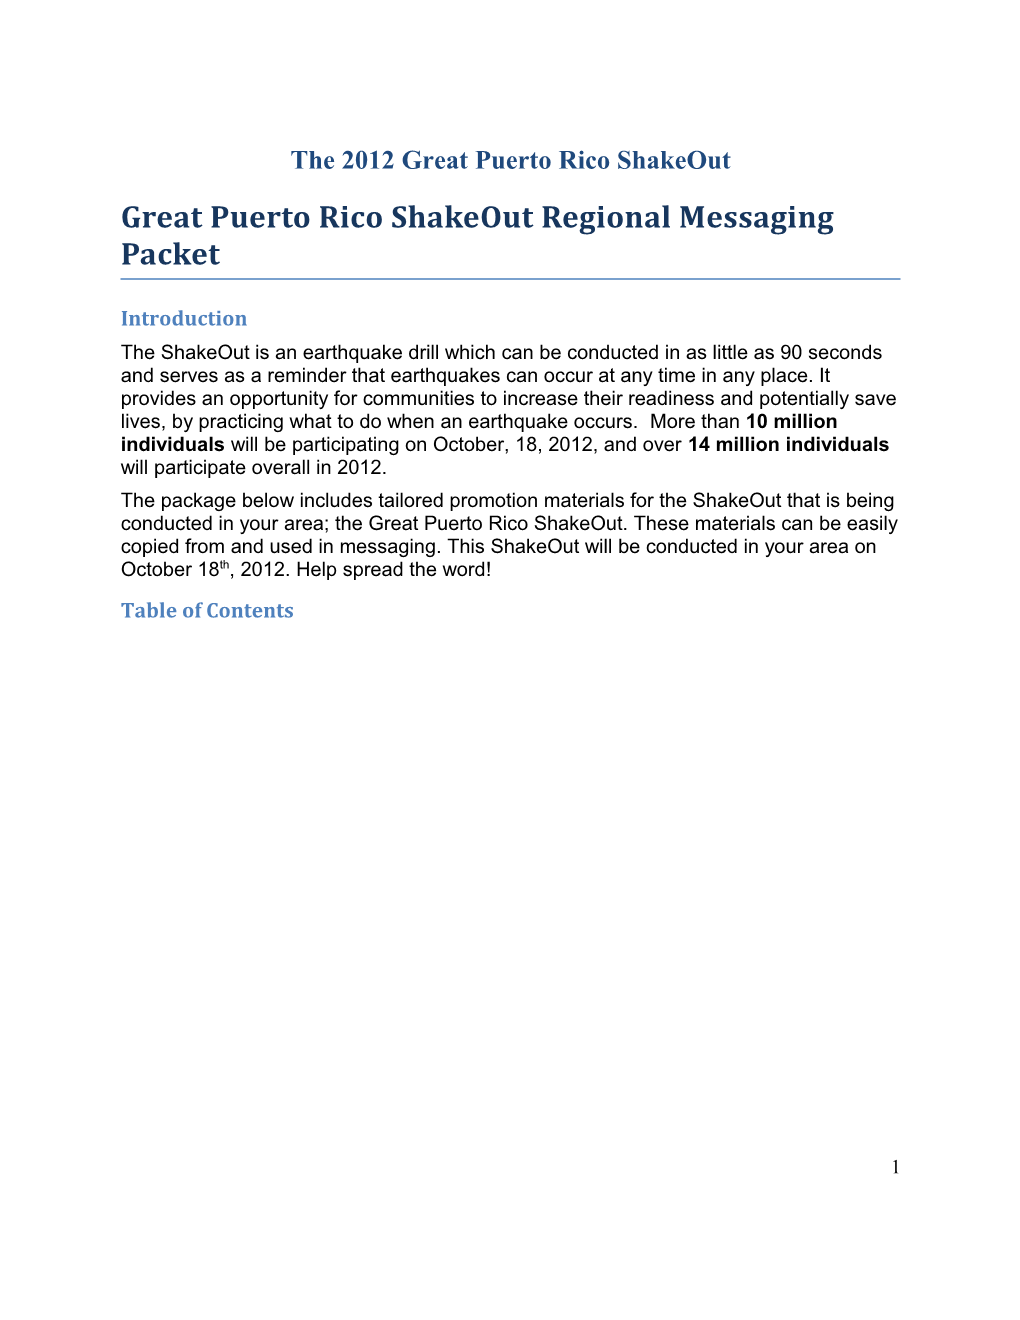 The 2012 Great Puerto Rico Shakeout